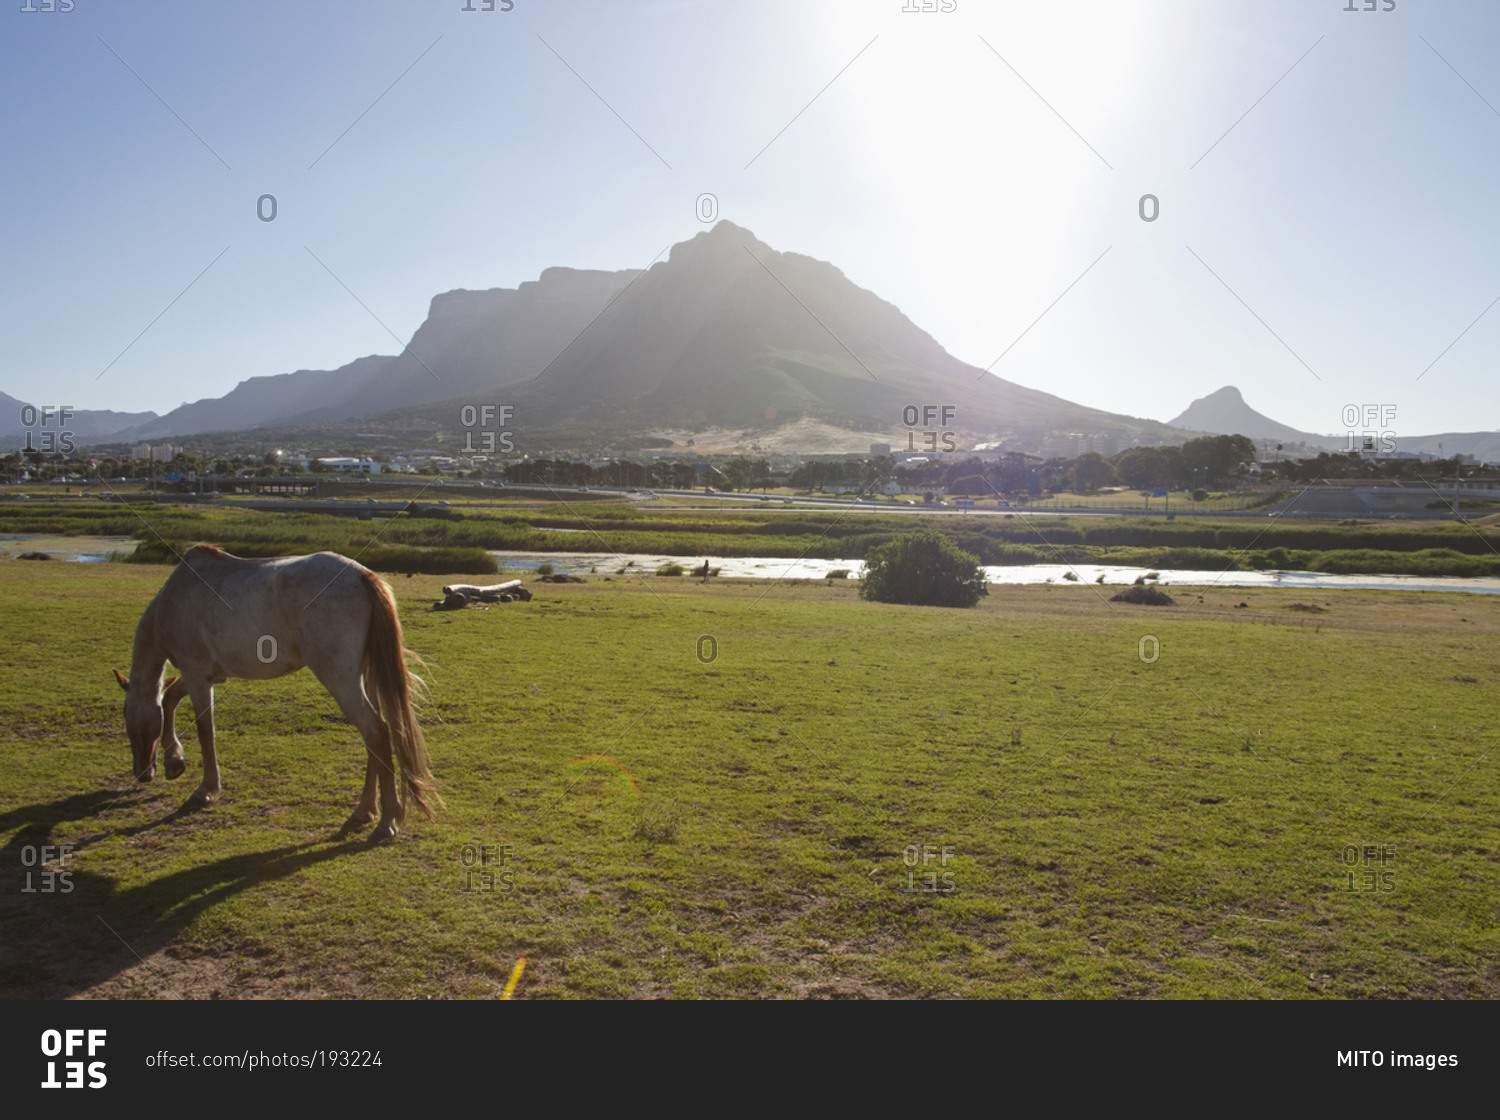 Side view of horse grazing on field, Table Mountain, South Africa, Cape Town